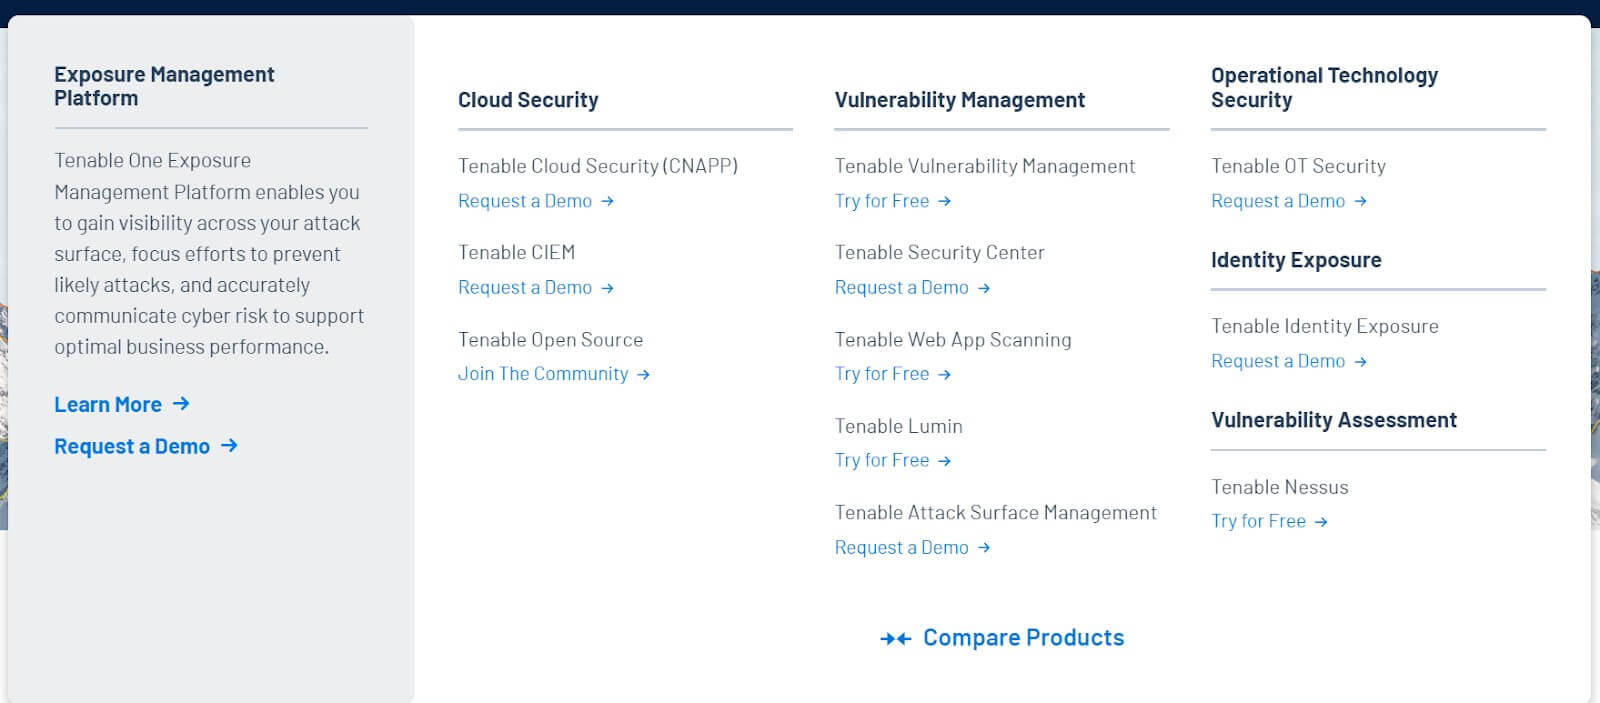 Informational overview on various cybersecurity services including Exposure Management, Cloud Security, and Vulnerability Management with demo invitations.